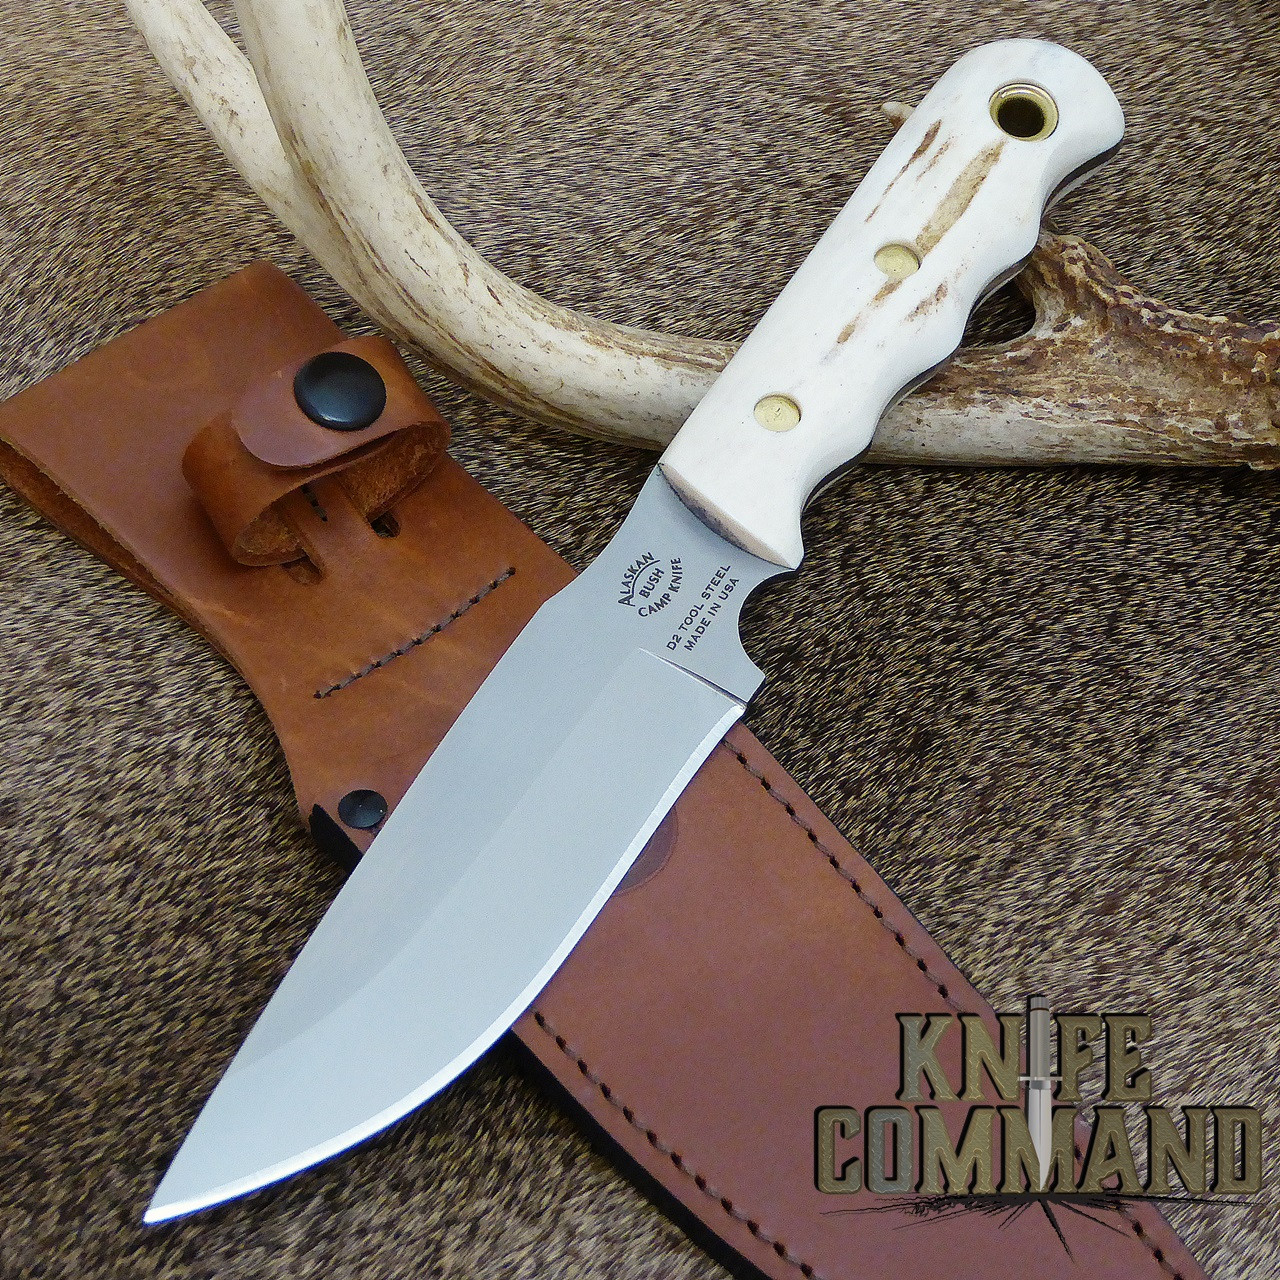 D2 blade and Stag handles.